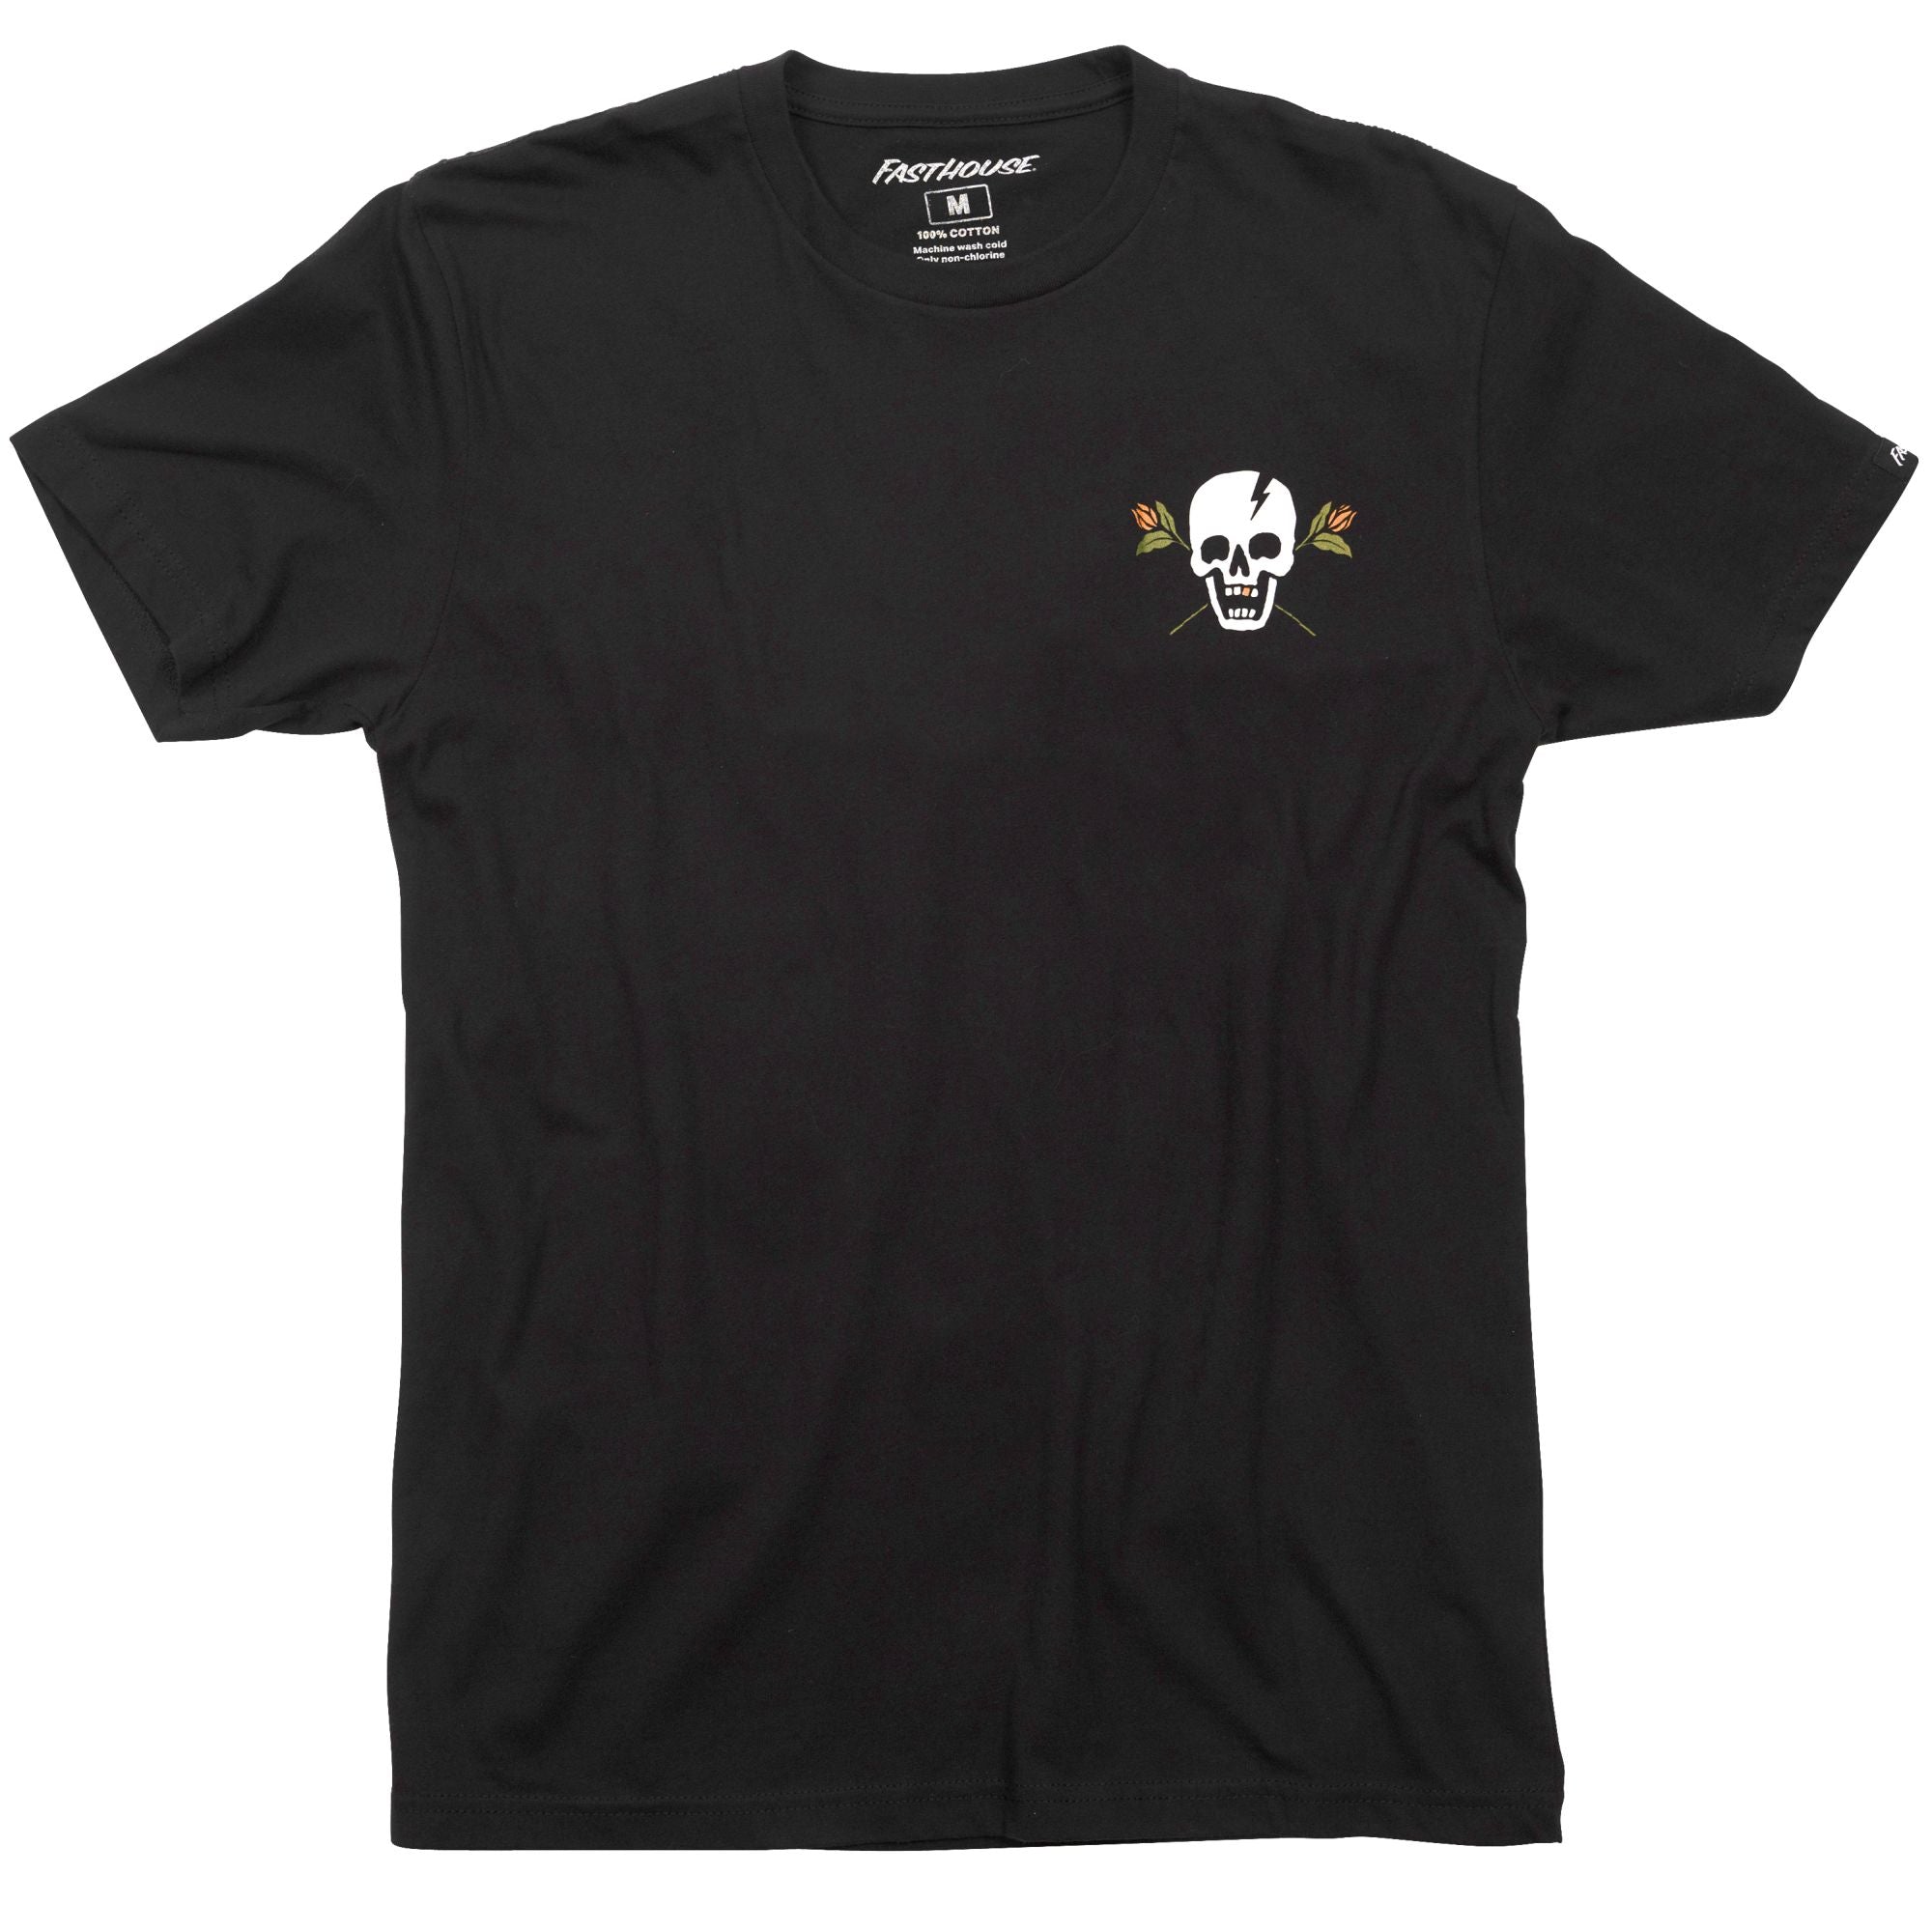 Fasthouse Goonie SS Tee